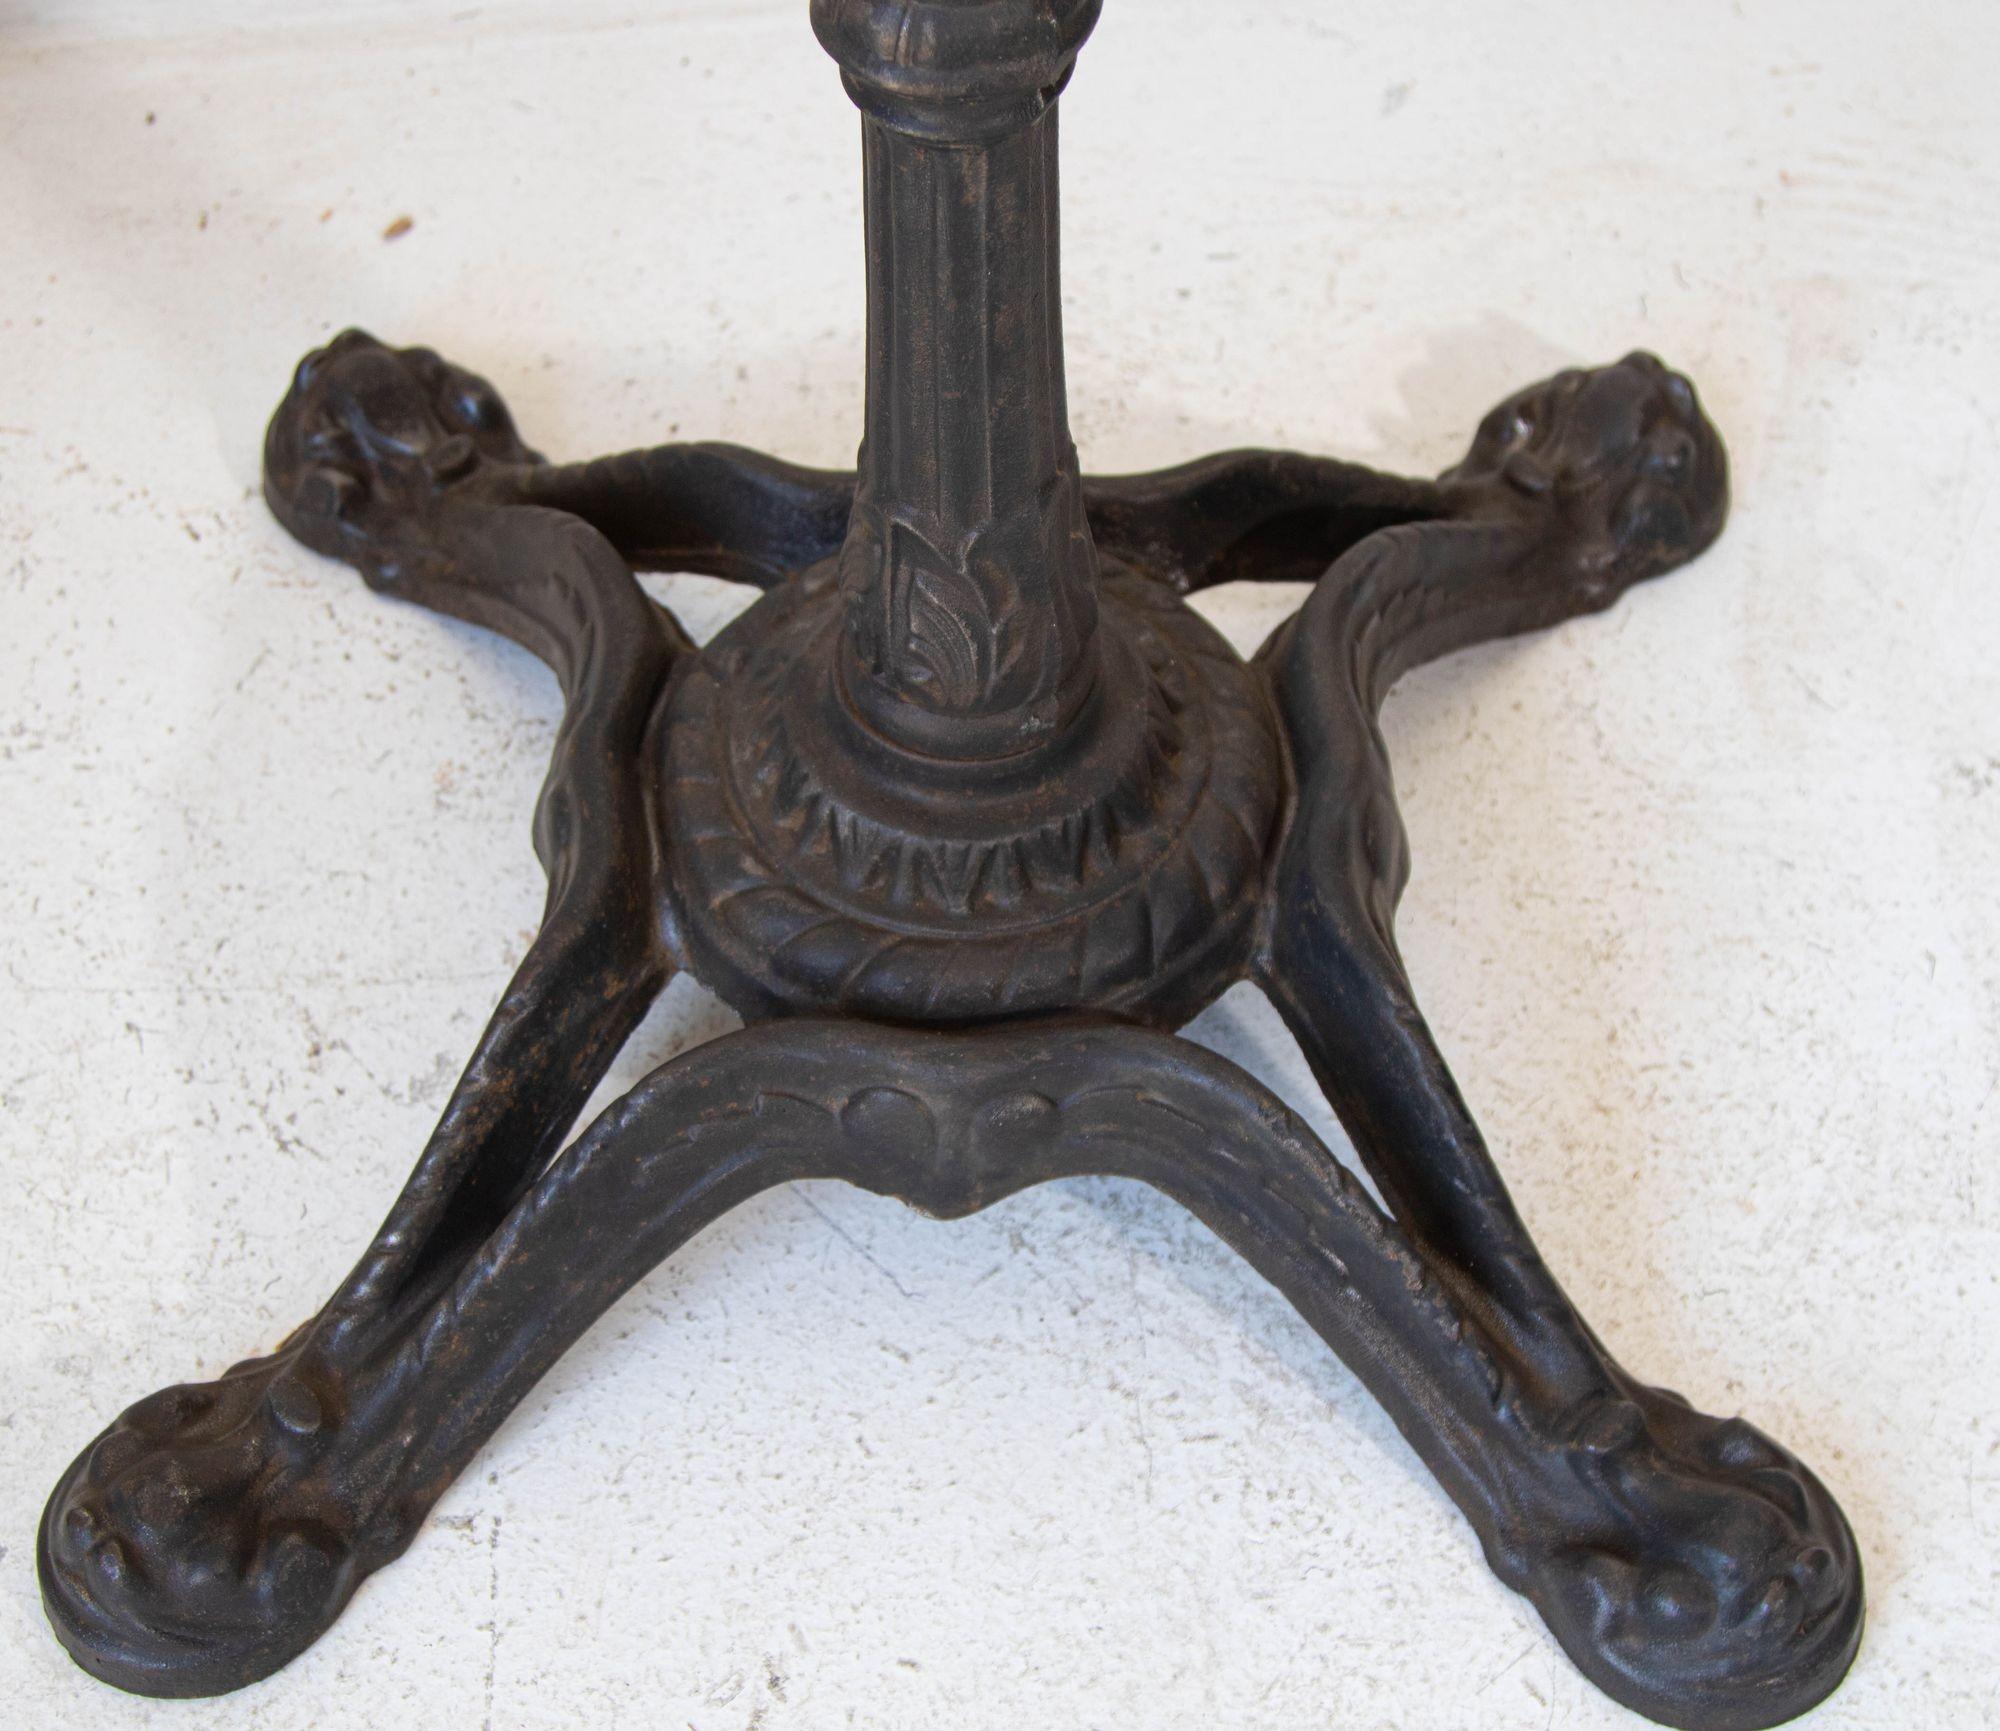 1920s Antique French Cast Iron Pedestal Bistro Table Stand.
Beautiful quality bistro table pedestal from France, made from heavy cast iron supported on 4 beautiful lion shaped legs.
French Bistro Table Paris cast iron pedestal table base.
Heavy cast